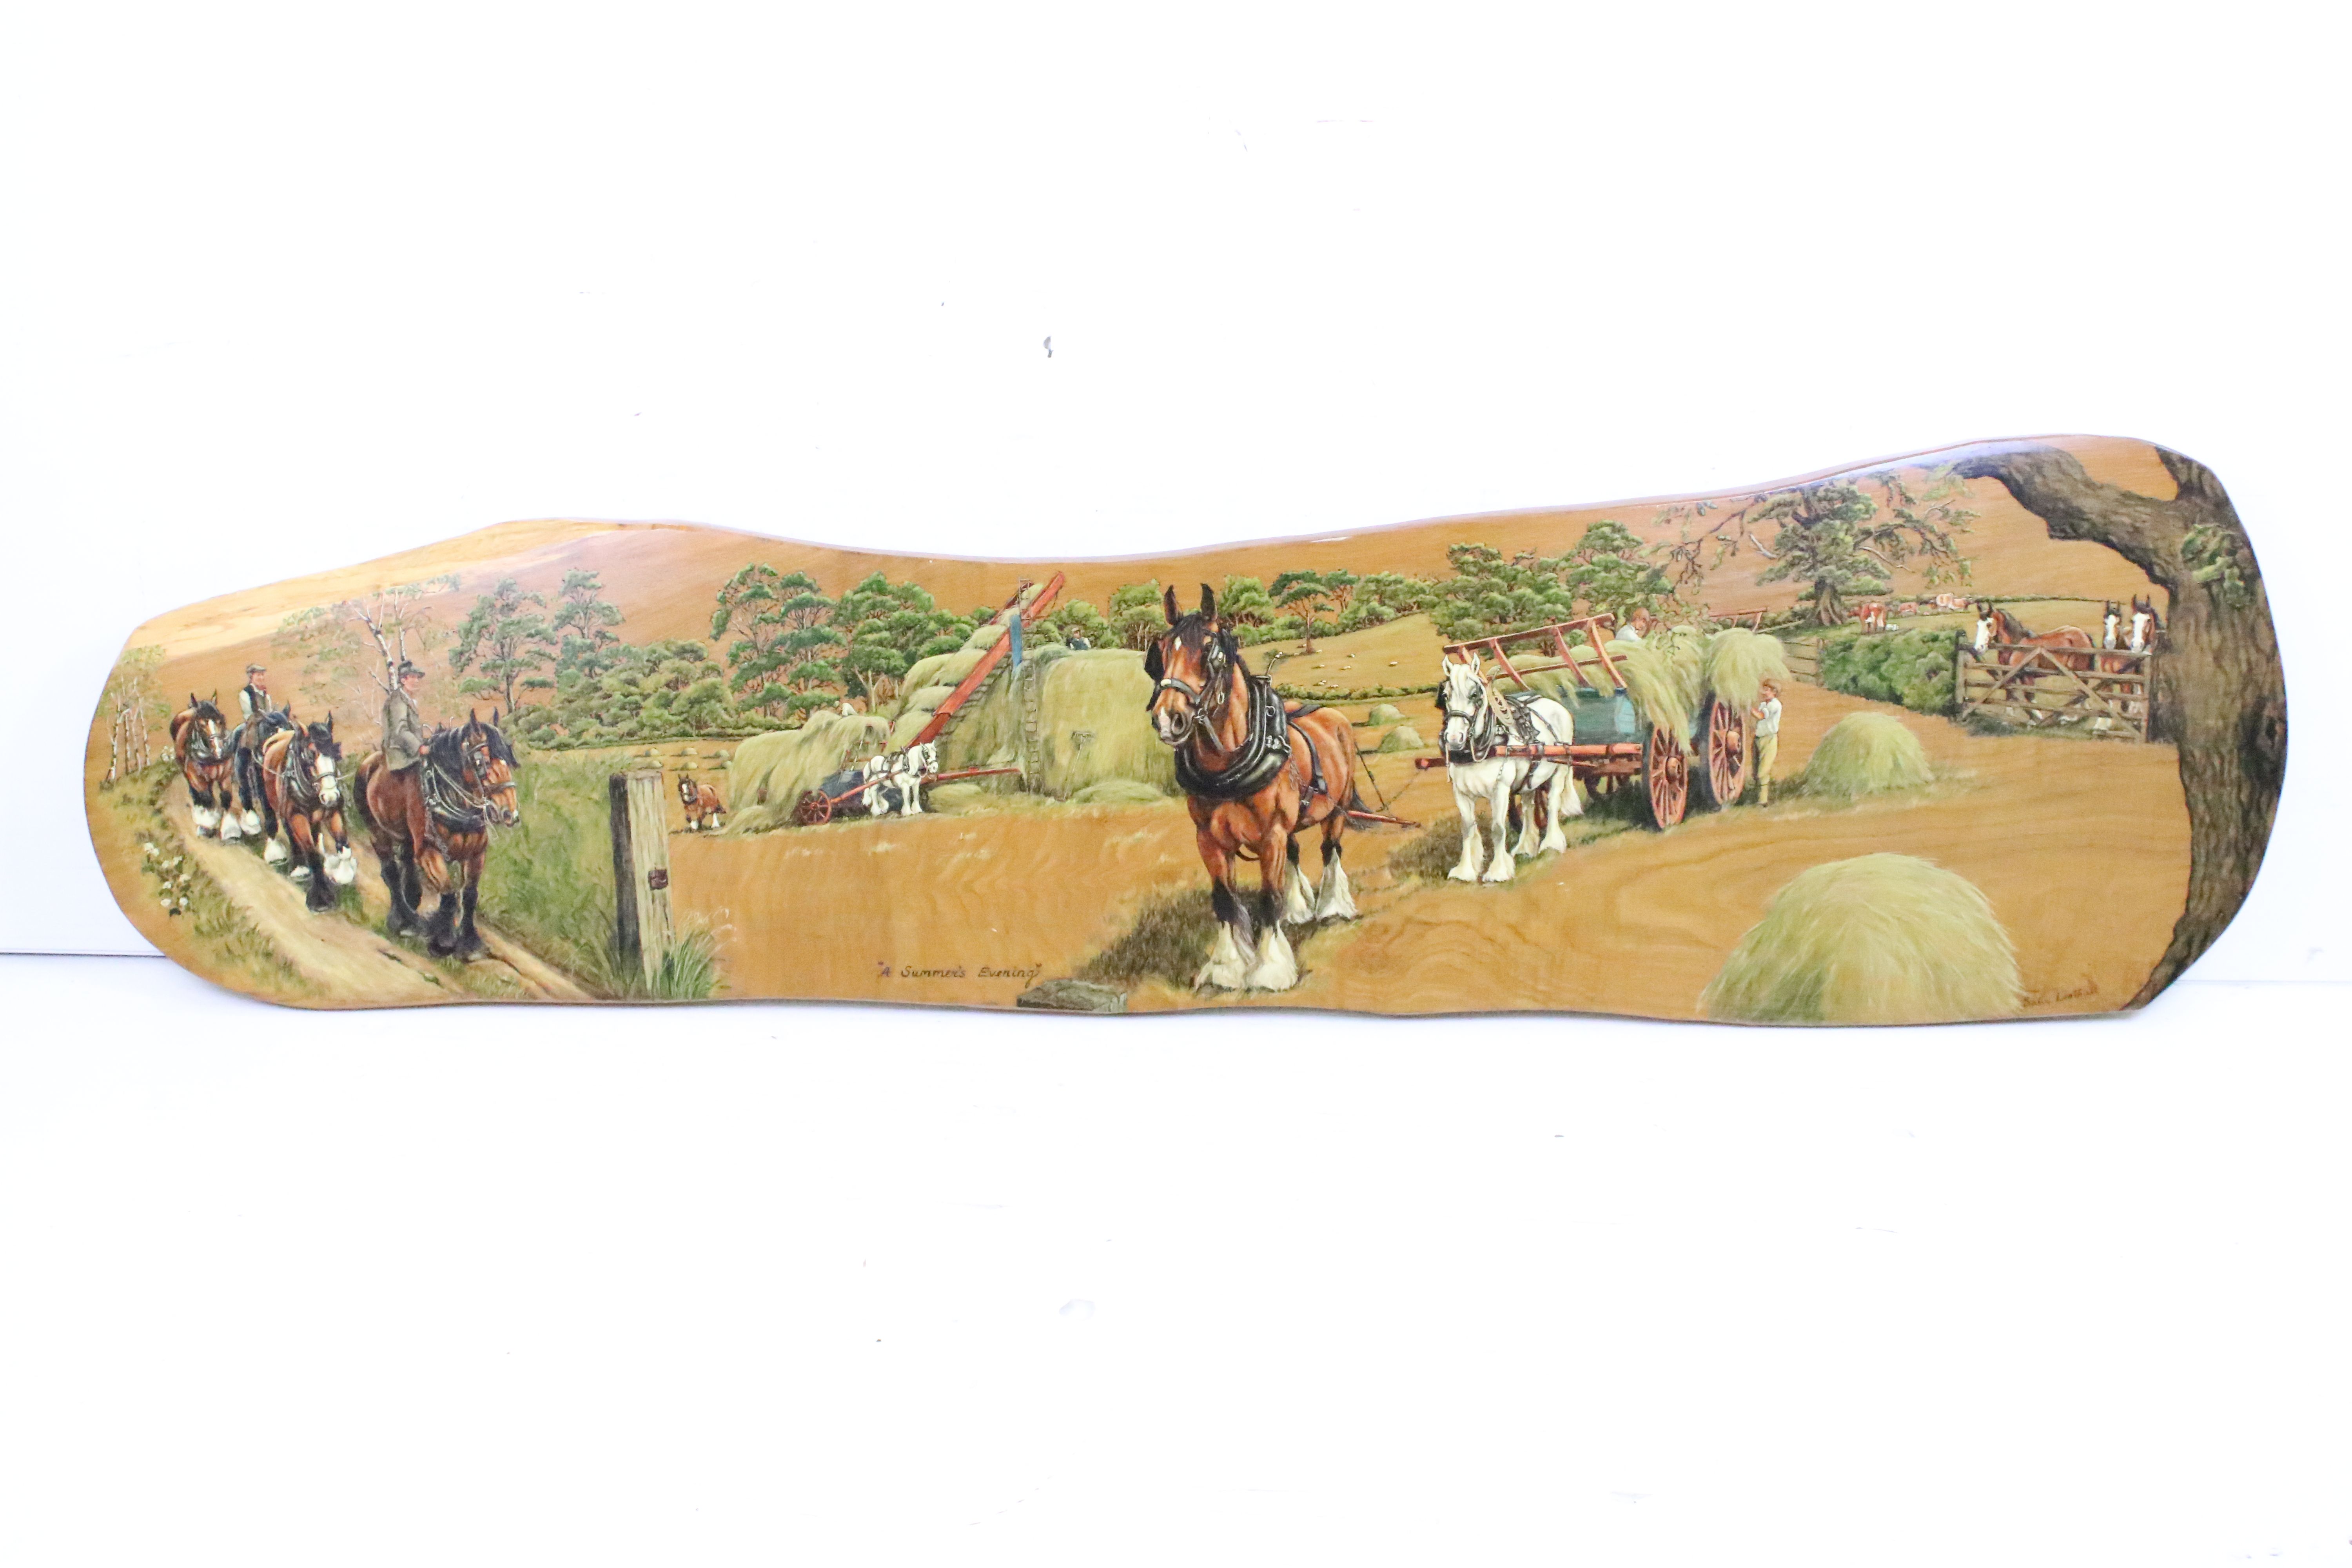 Large pine panel with painted scene titled "A Summer's Evening", depicting shire horses & hay carts,